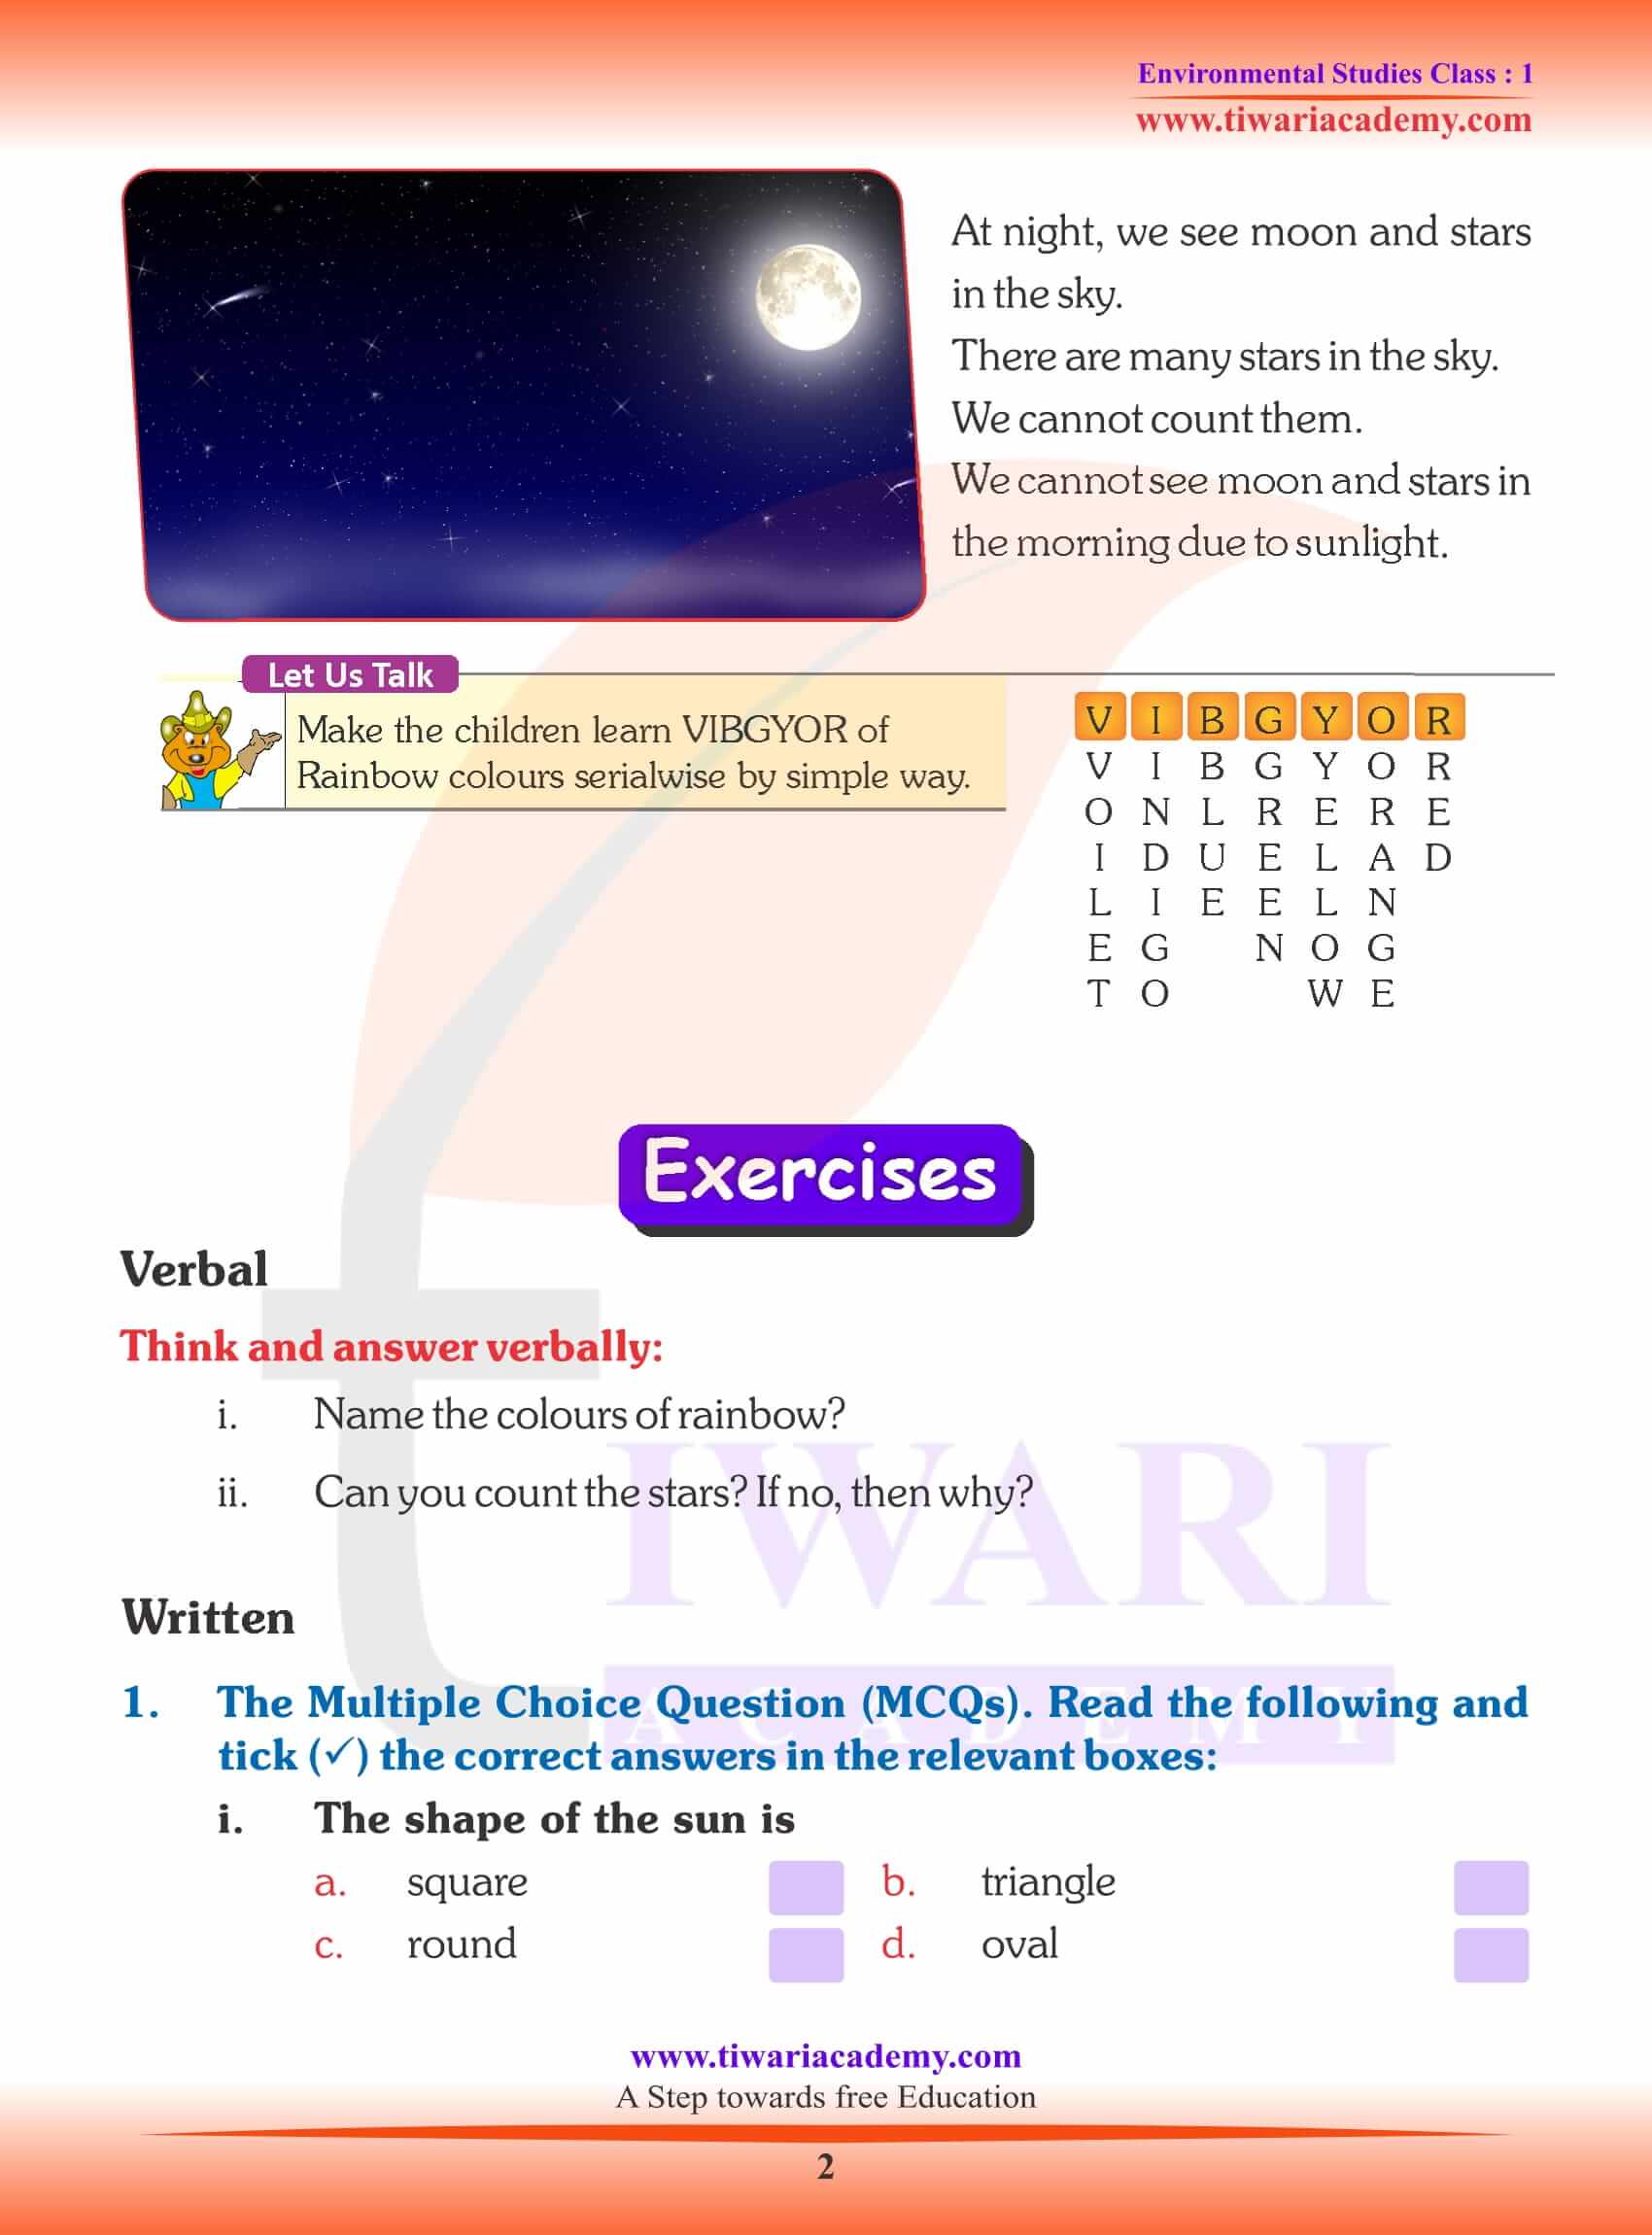 NCERT Solutions for Class 1 EVS Chapter 16 Exercises